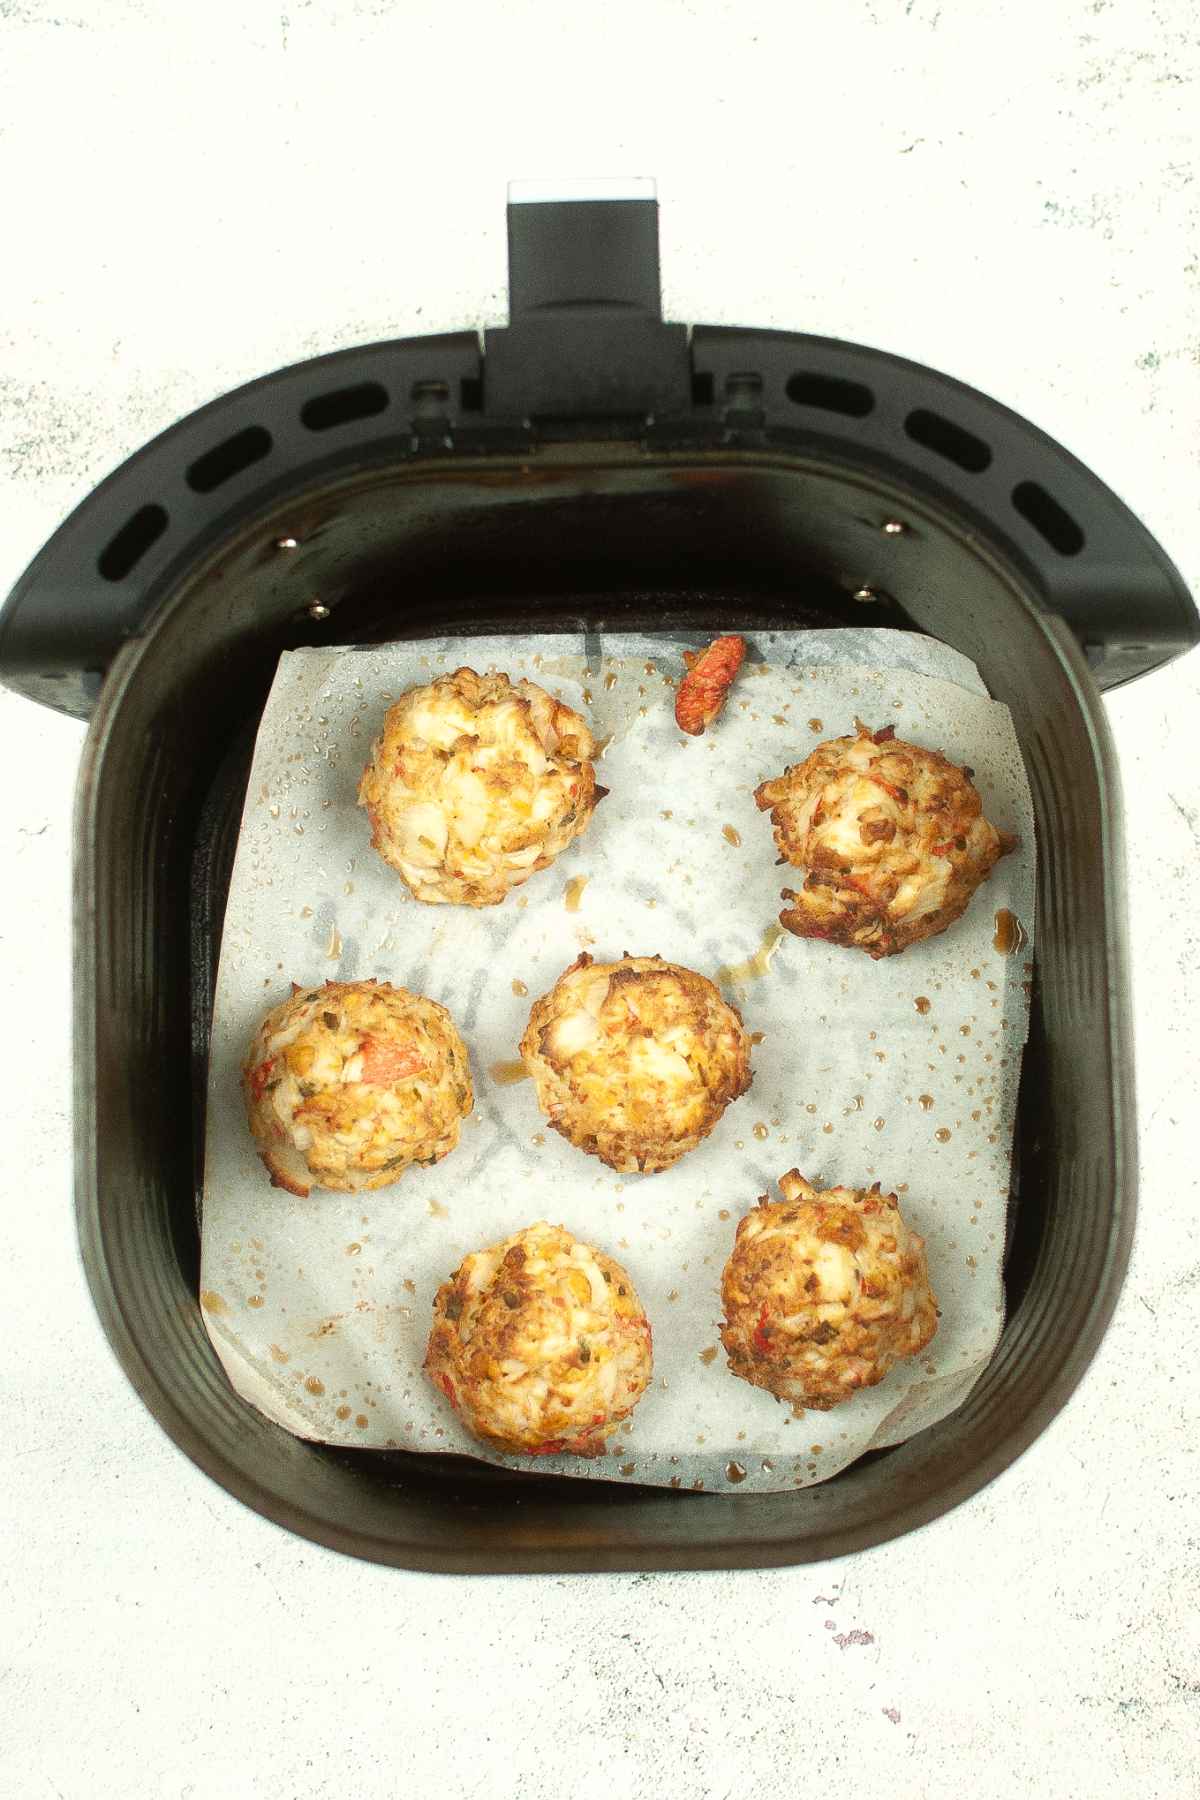 Cooked crab cakes in air fryer basket.